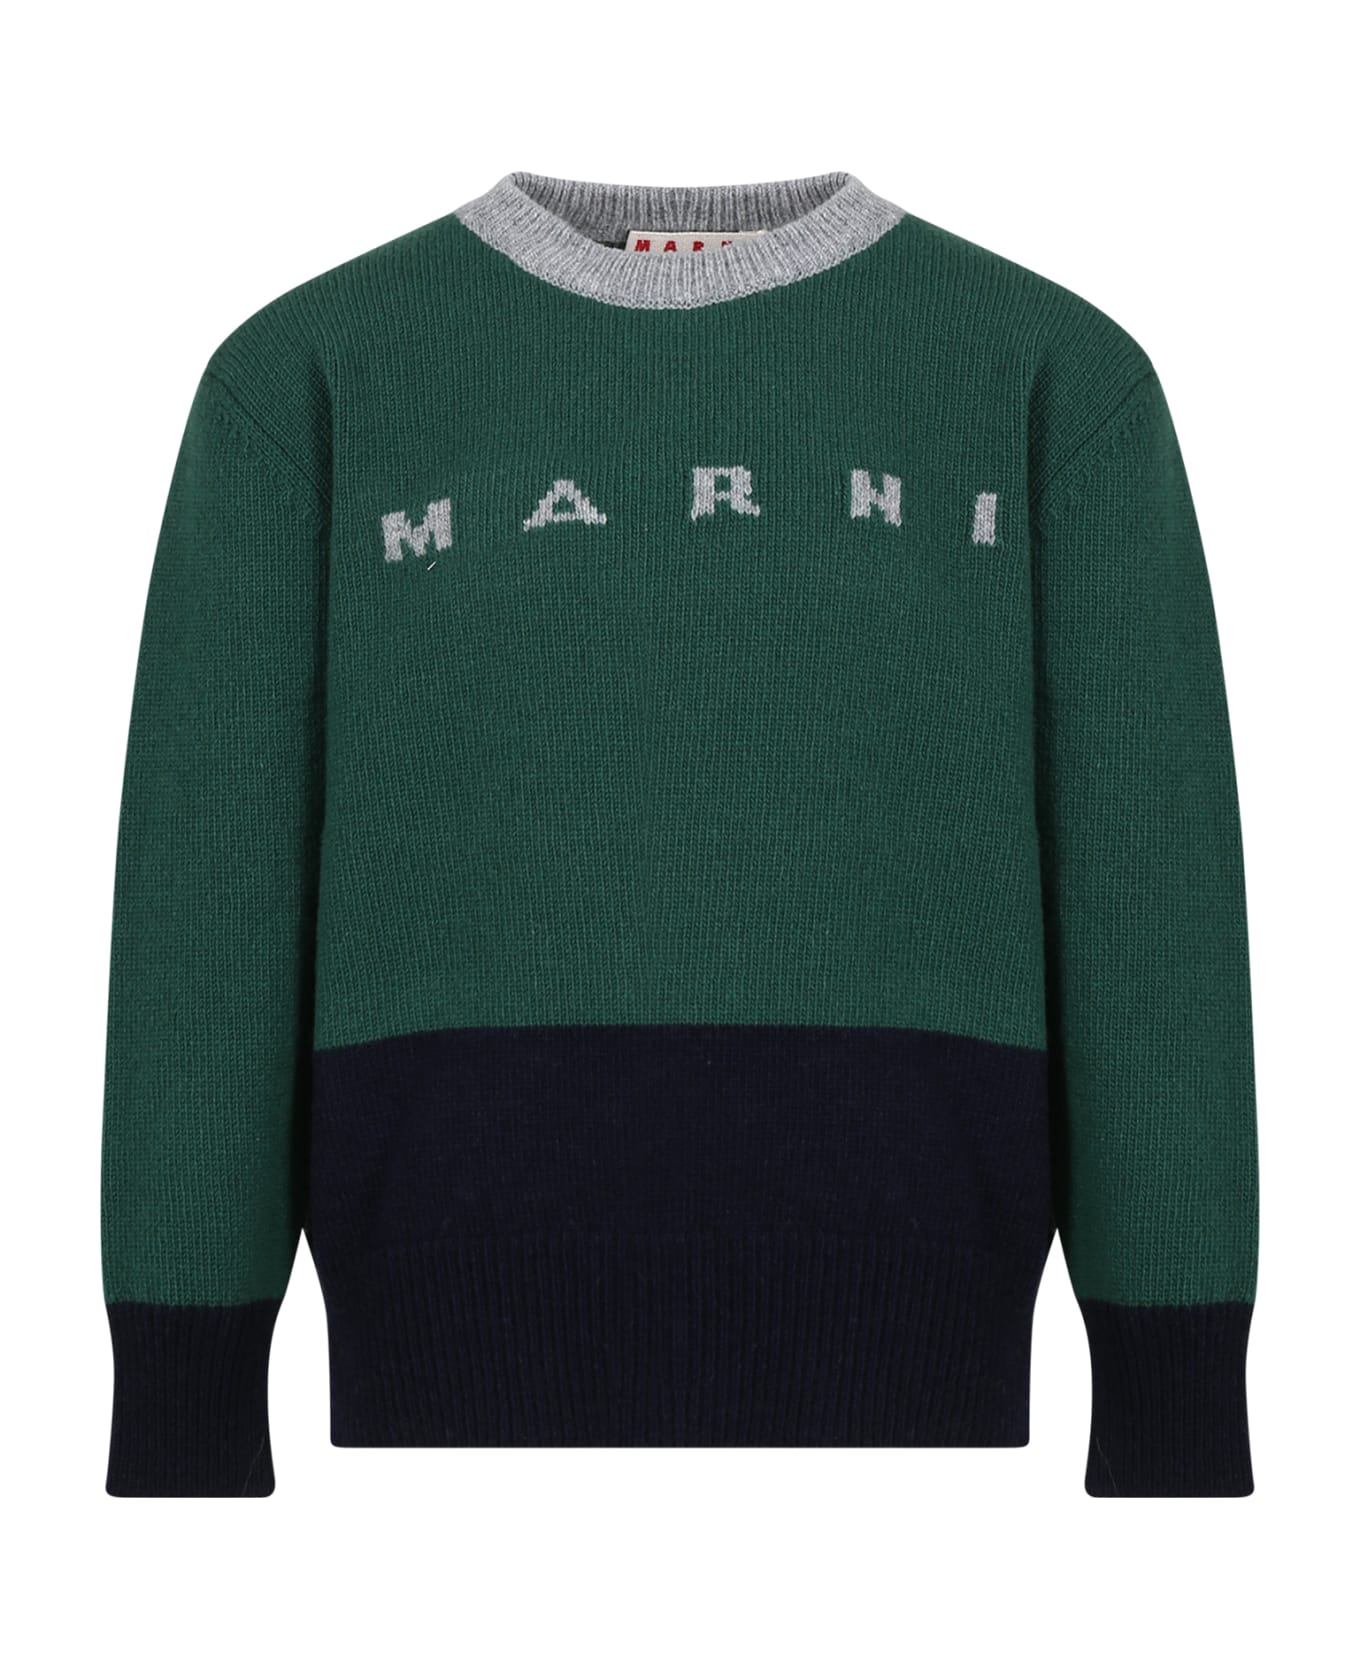 Marni Green Sweater For Kids With Logo - Green